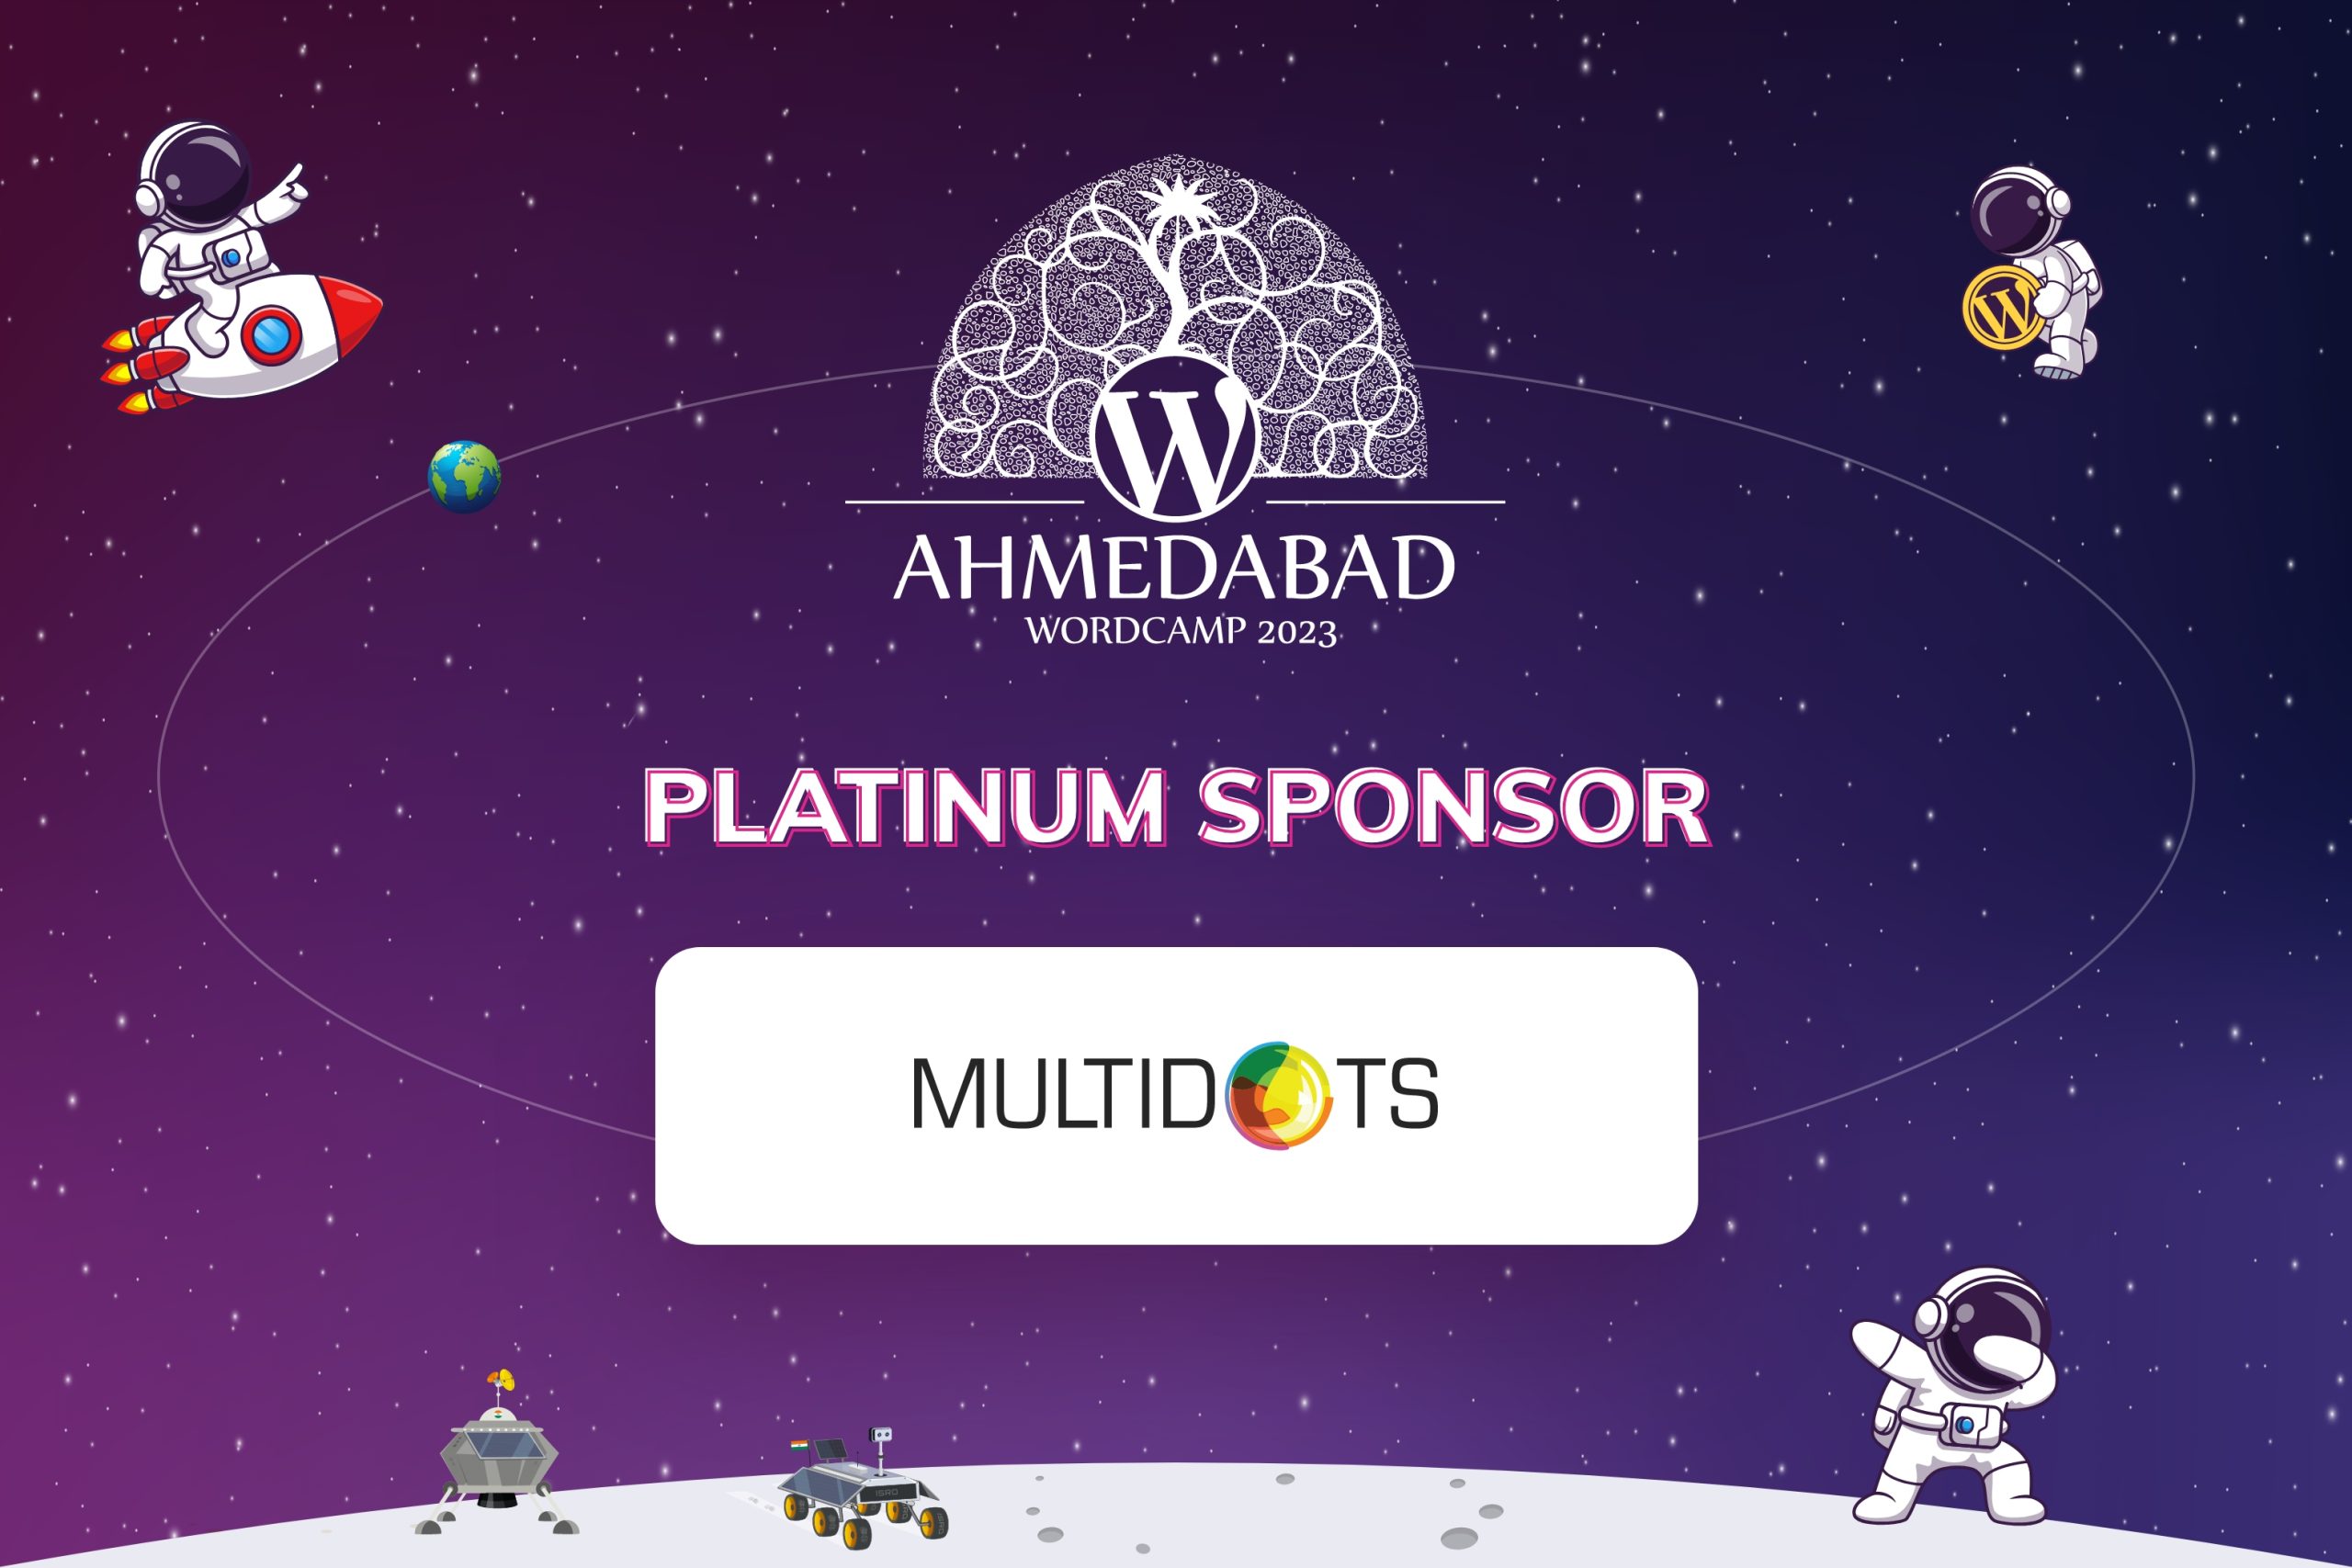 Thank You Multidots Solutions Private Limited, for being our Platinum Sponsor